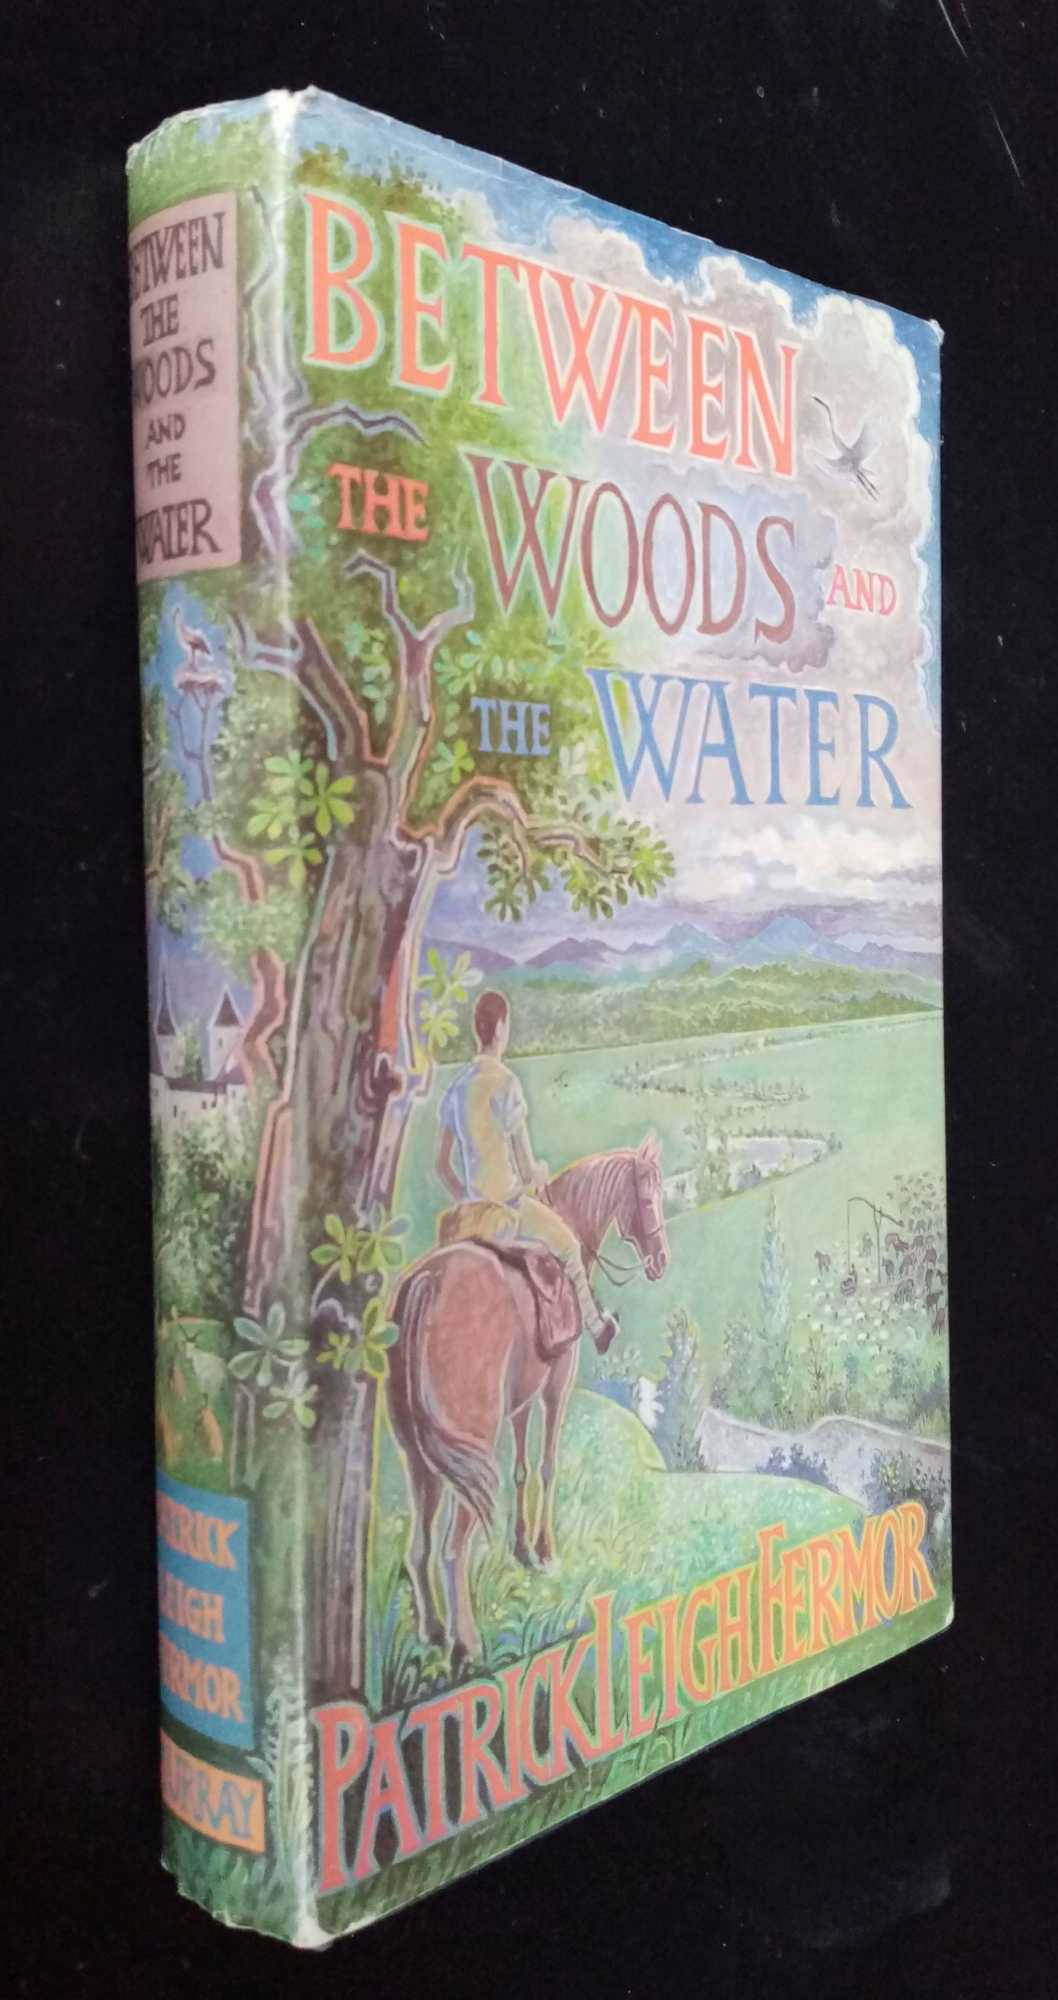 Patrick Leigh Fermor - Between the Woods and the Water    (First edition, first printing)